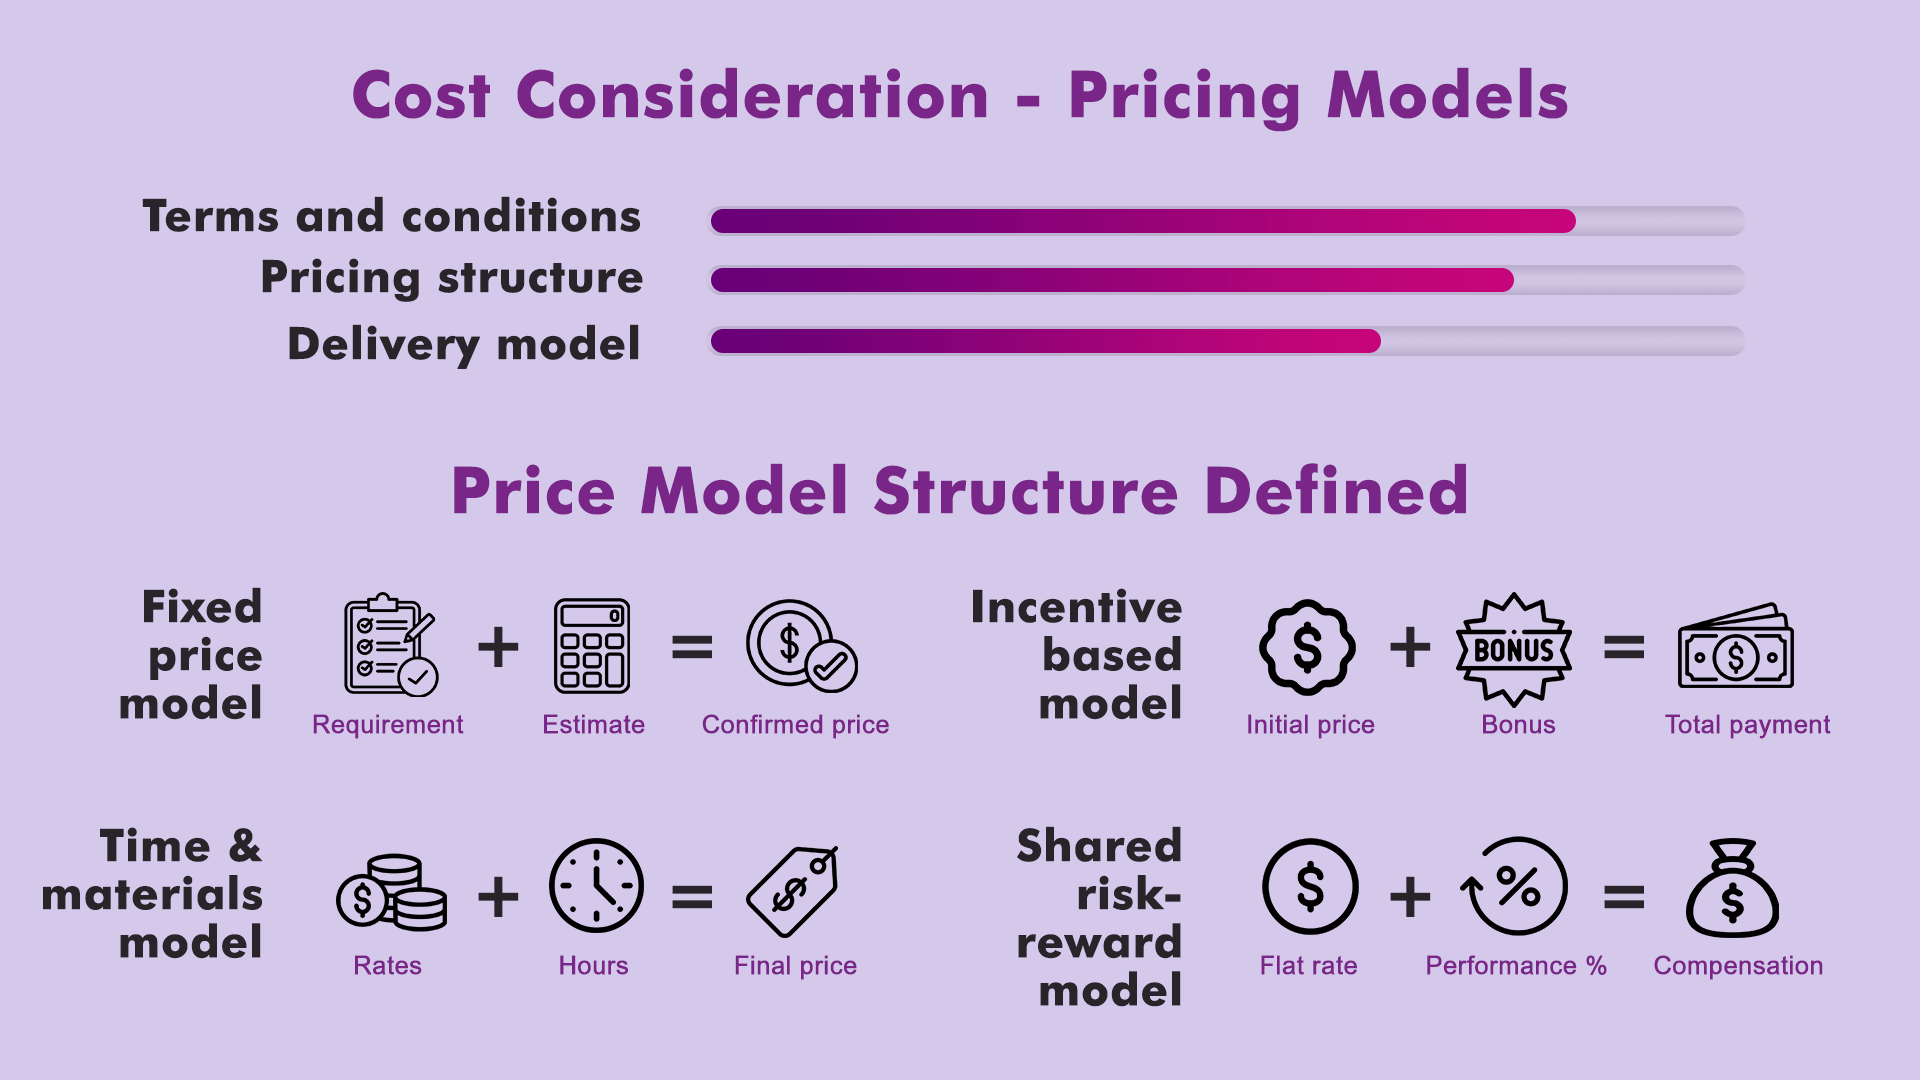 Cost Consideration - Pricing Models